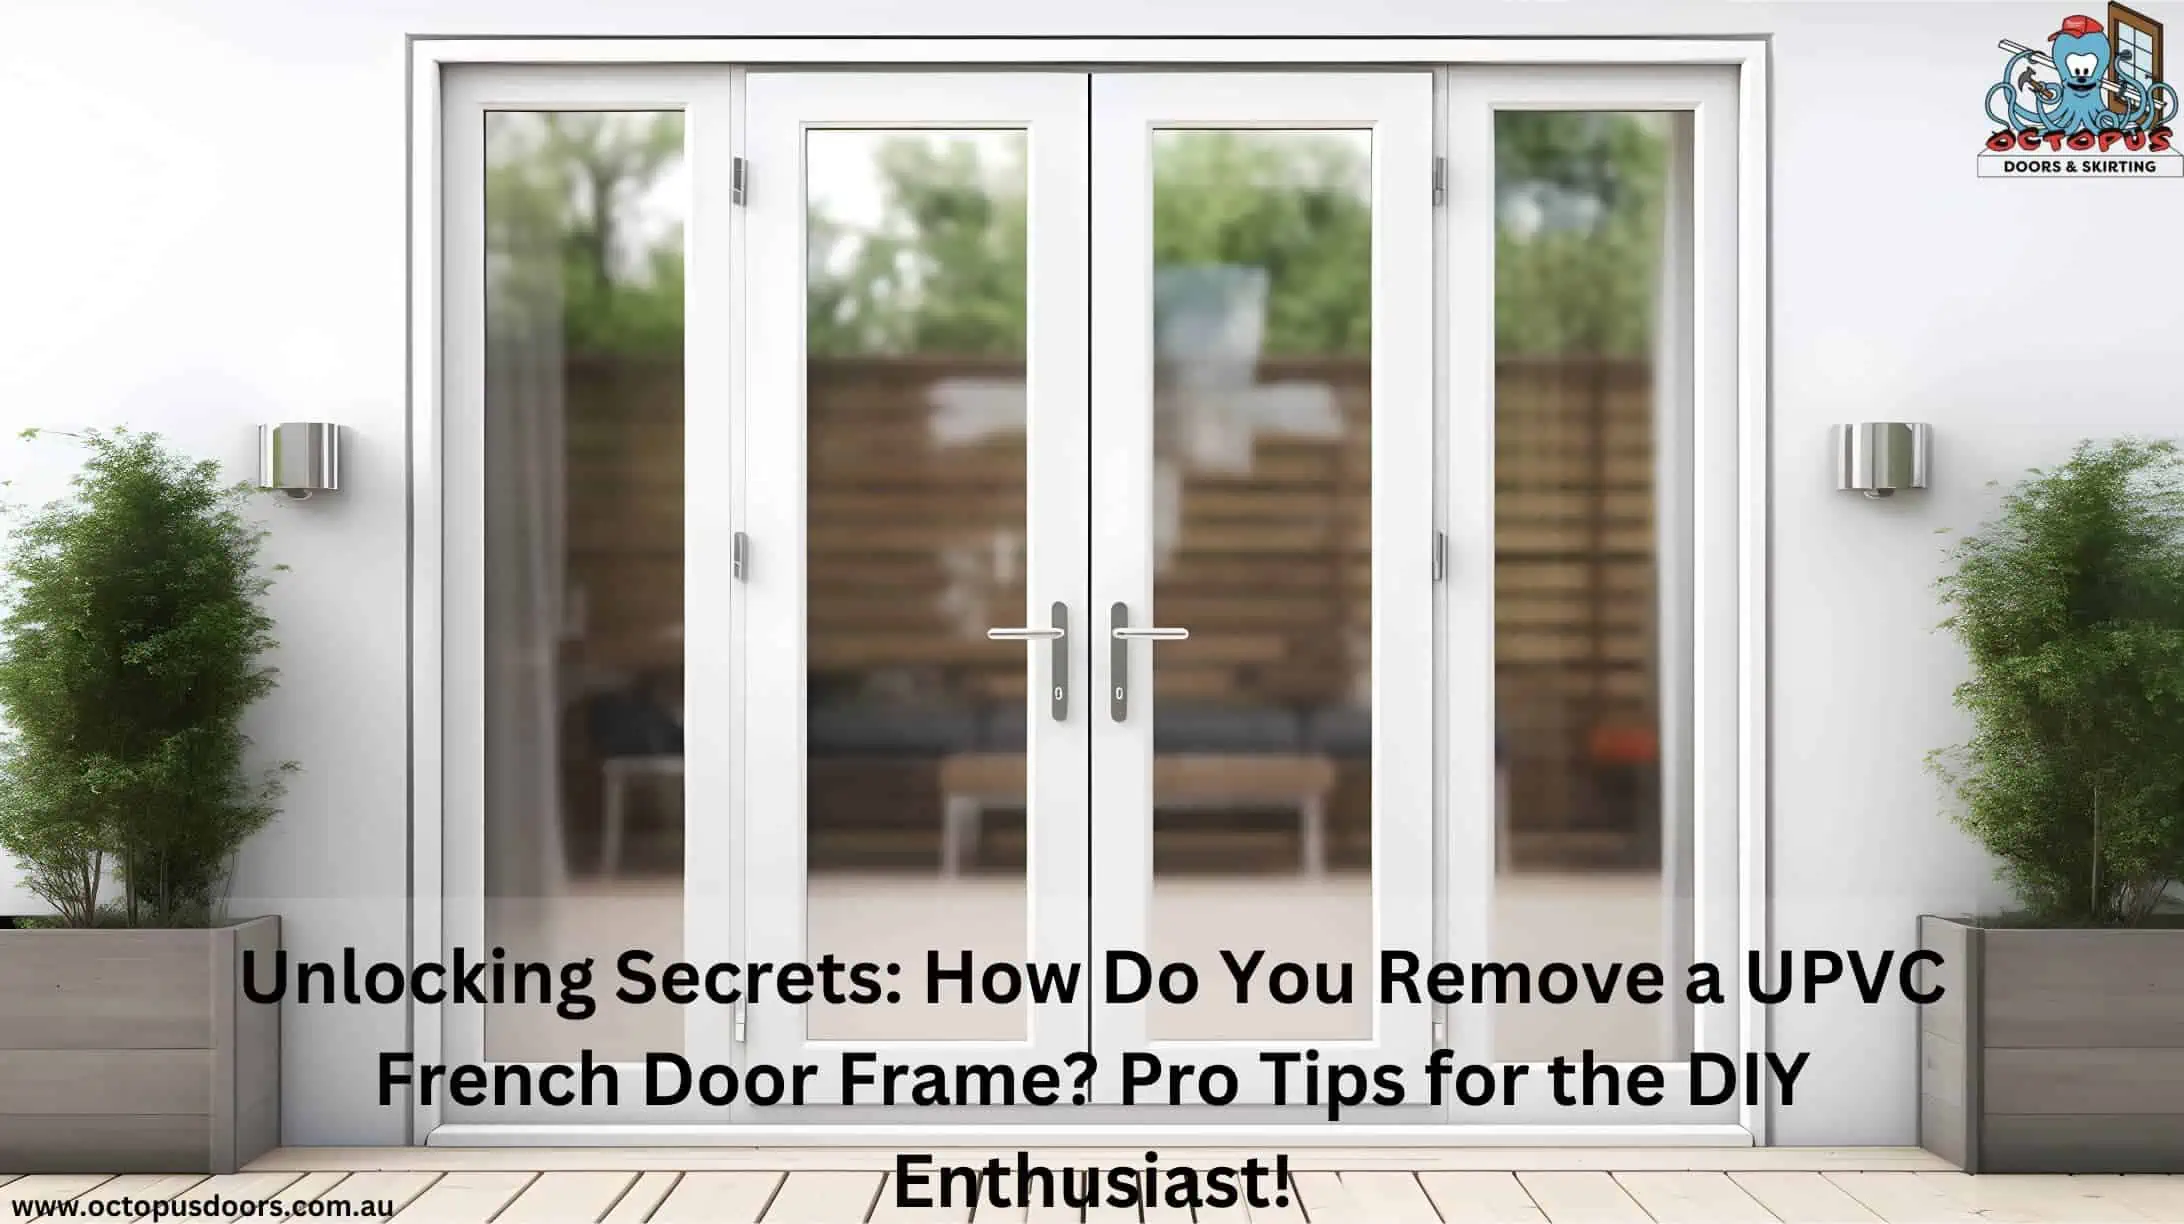 Unlocking Secrets How Do You Remove a UPVC French Door Frame Pro Tips for the DIY Enthusiast! (1)